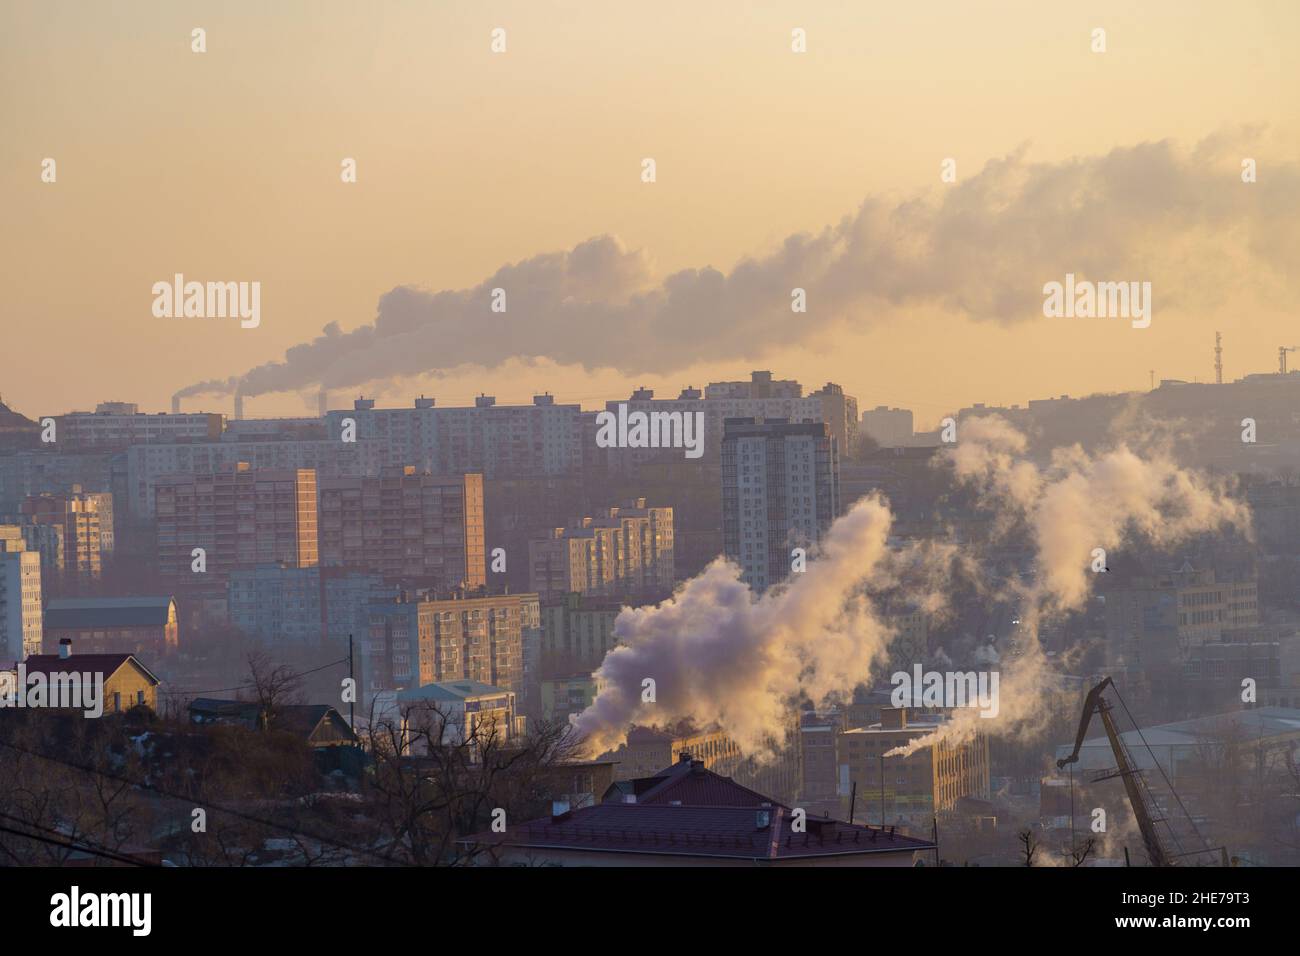 Urban landscape with smoke from heating systems. Vladivostok, Russia Stock Photo